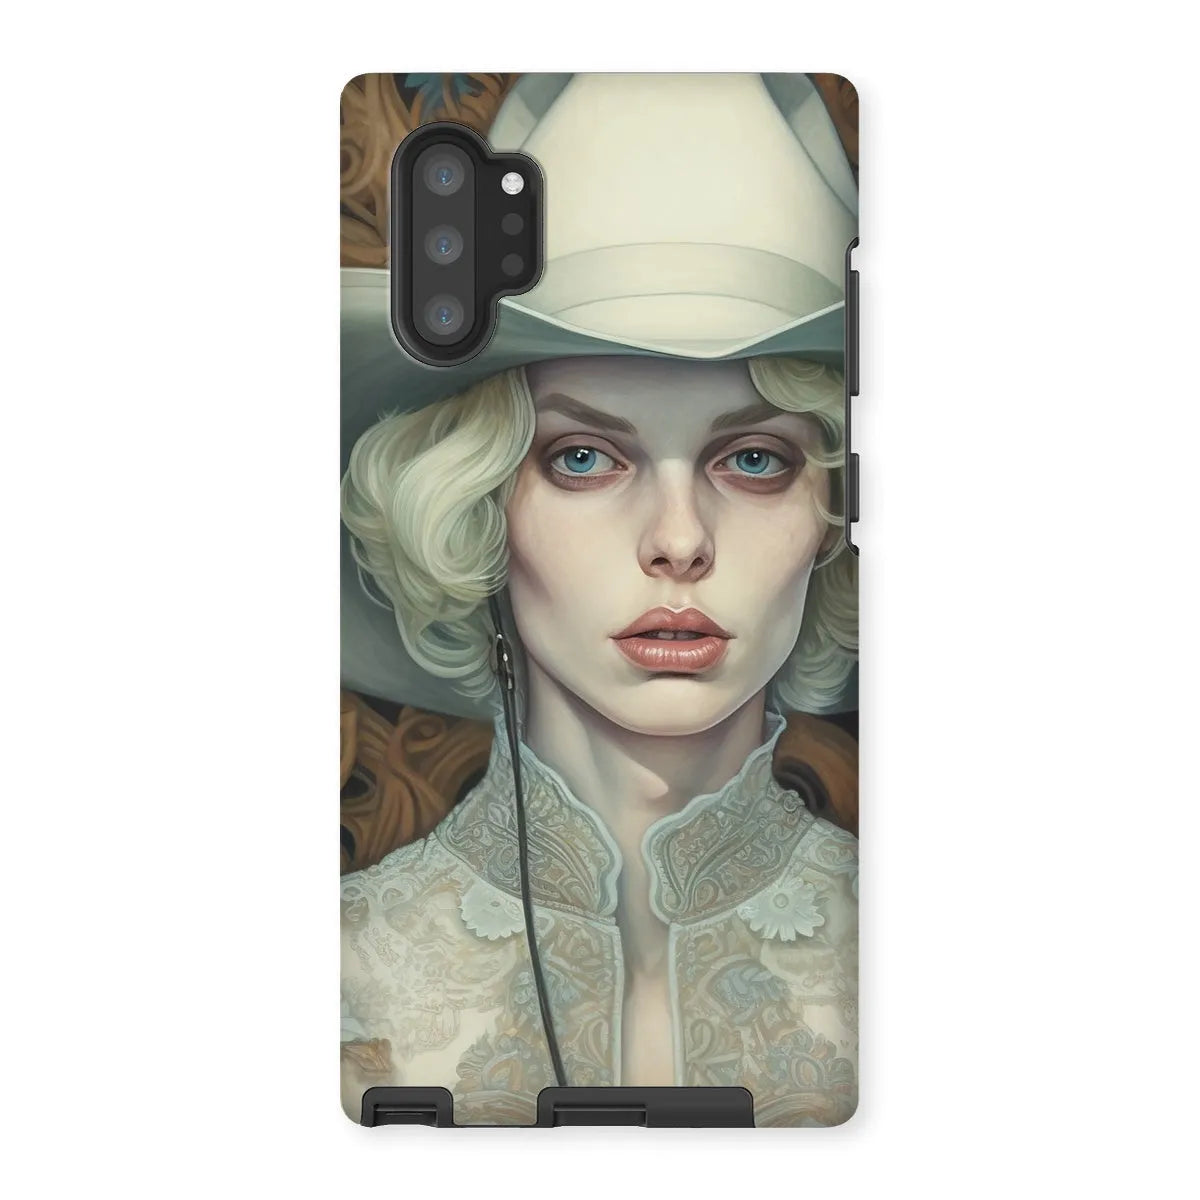 Winnie The Lesbian Cowgirl - Sapphic Art Phone Case - Samsung Galaxy Note 10p / Matte - Mobile Phone Cases - Aesthetic